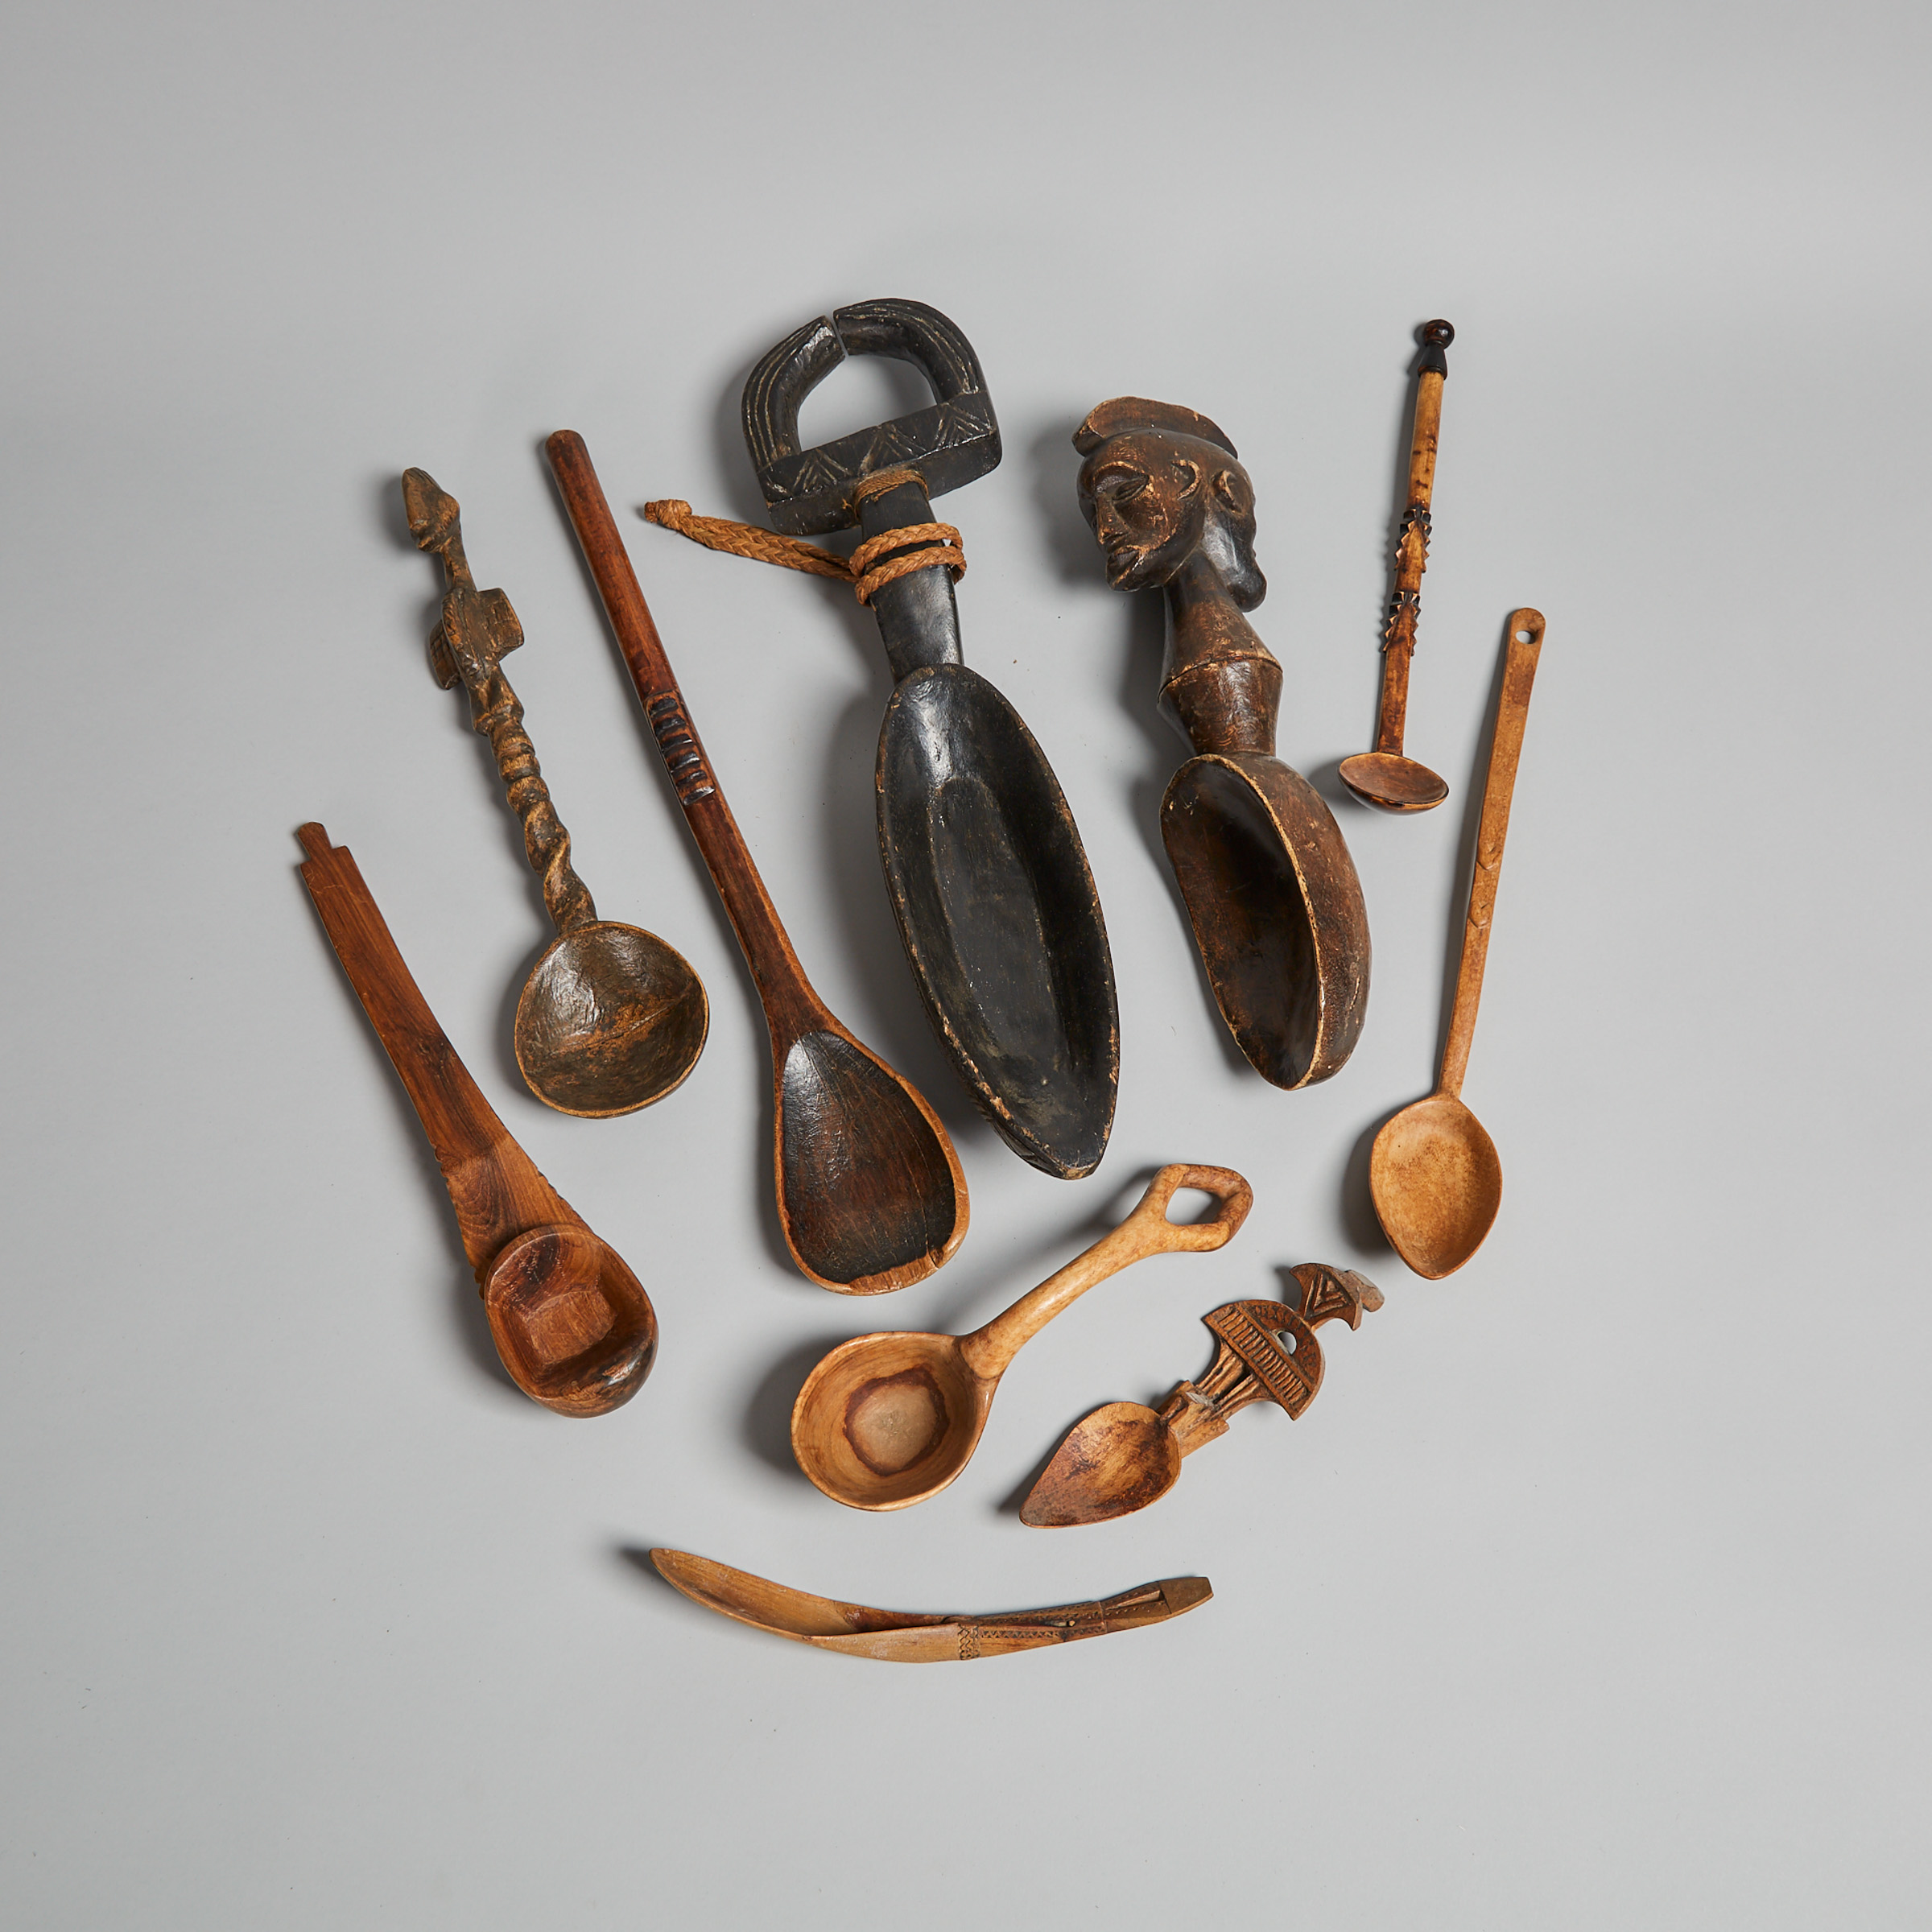 Group of Ten Carved Wood African Spoons